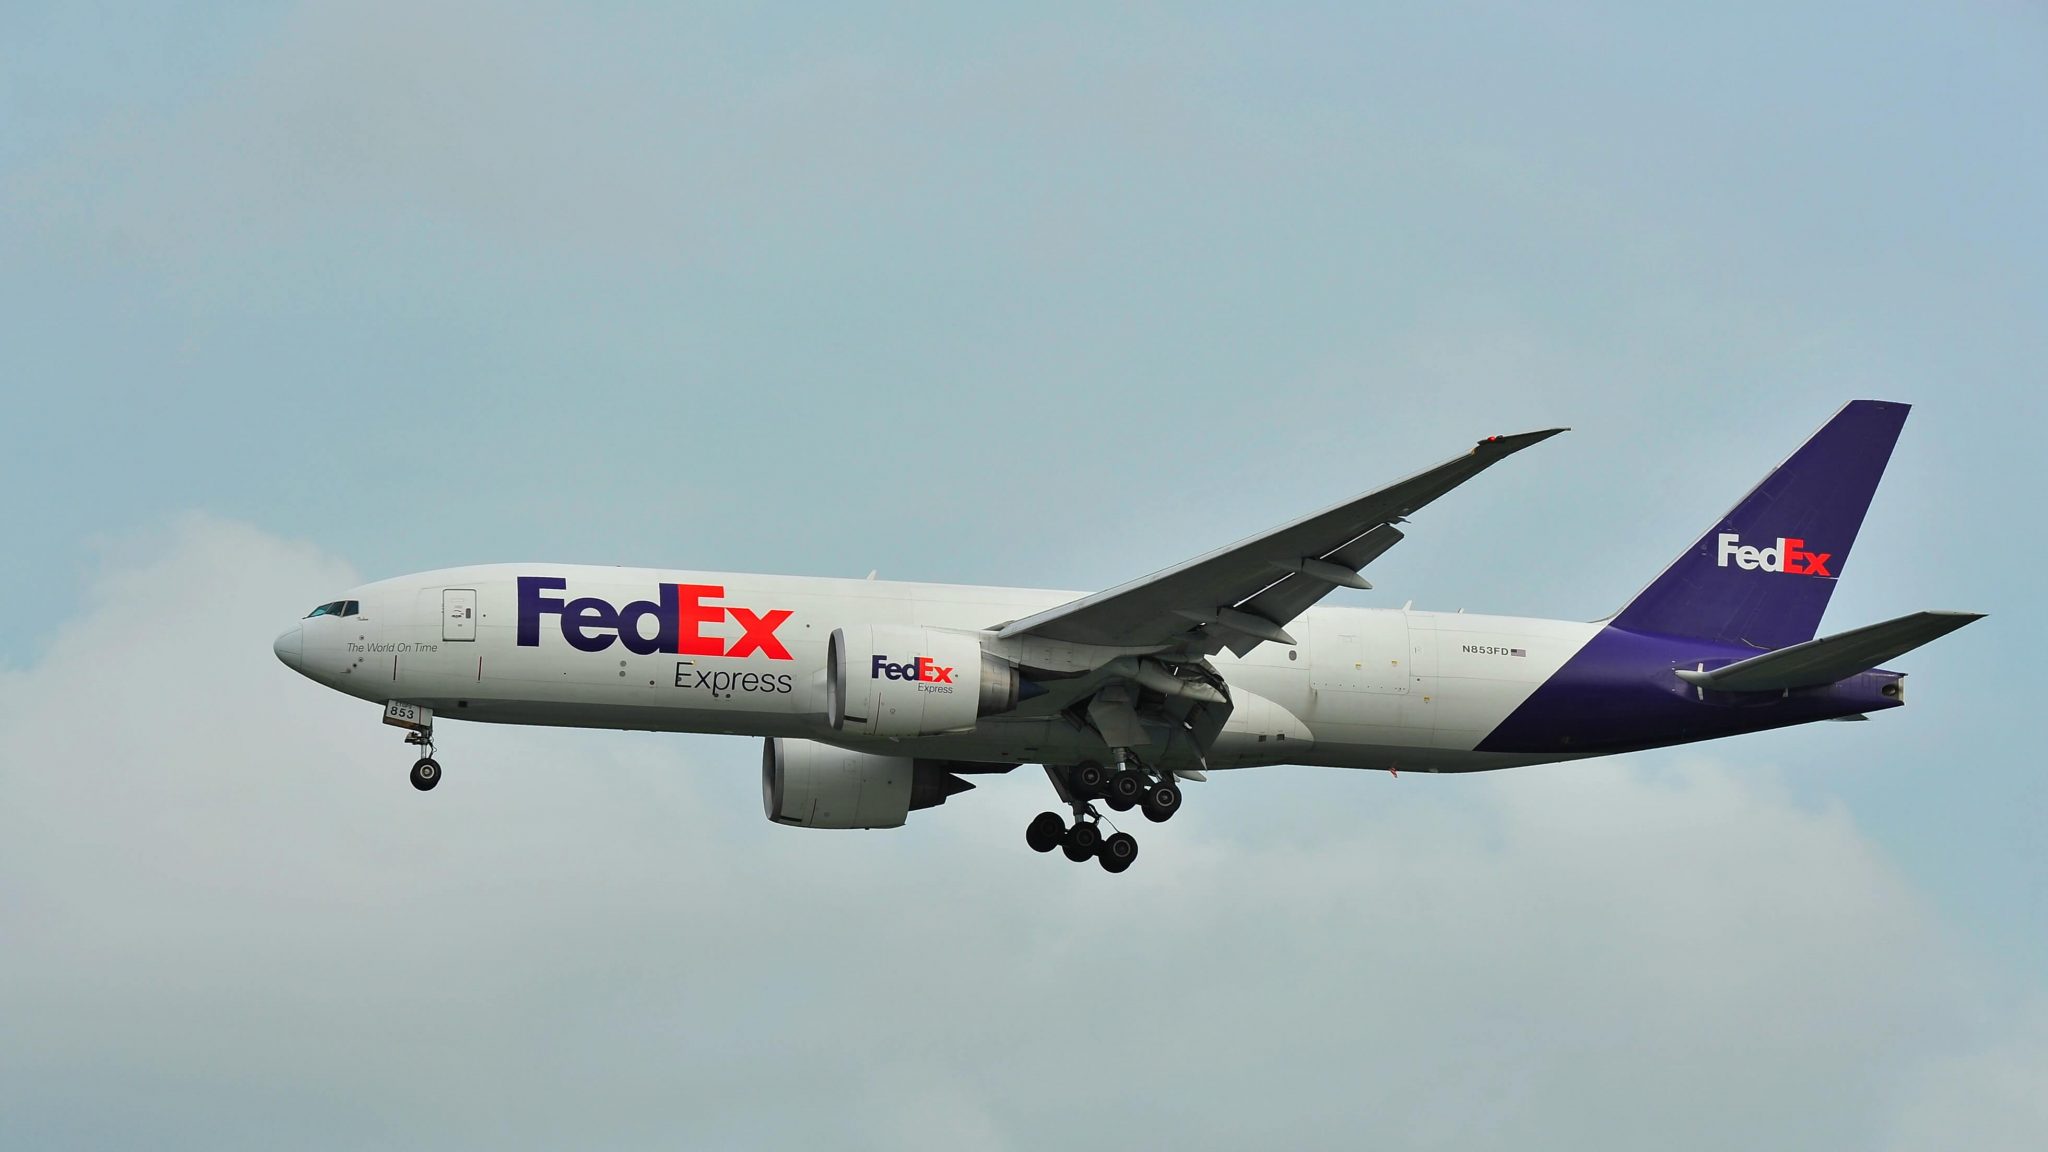 FedEx plans to ground more aircraft with decline in revenue and operating income